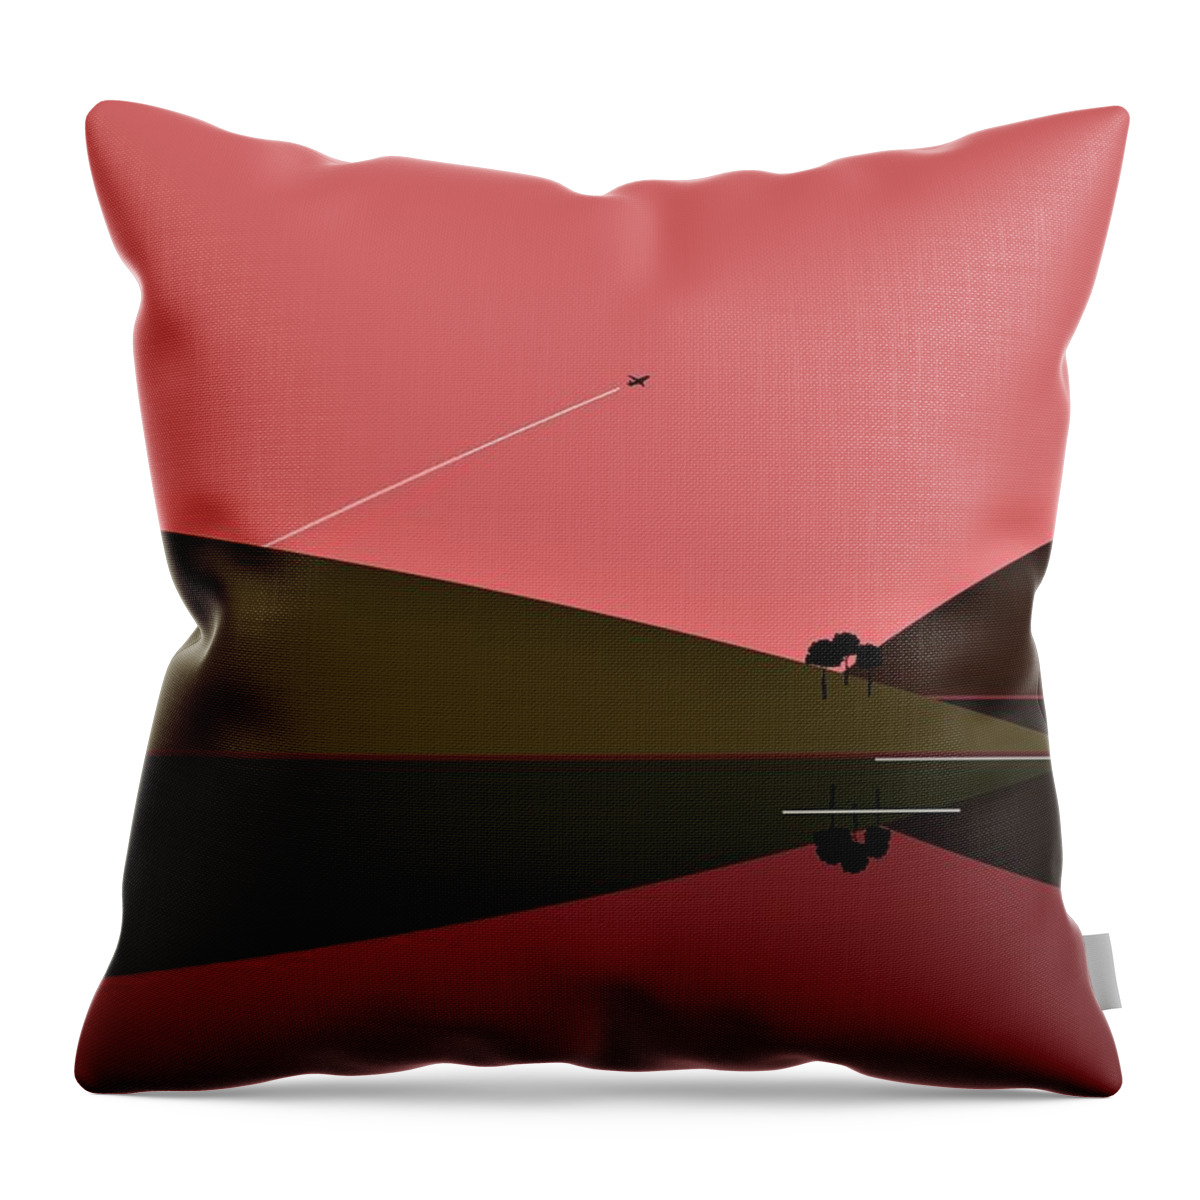 Flying Throw Pillow featuring the digital art In Flight by Fatline Graphic Art